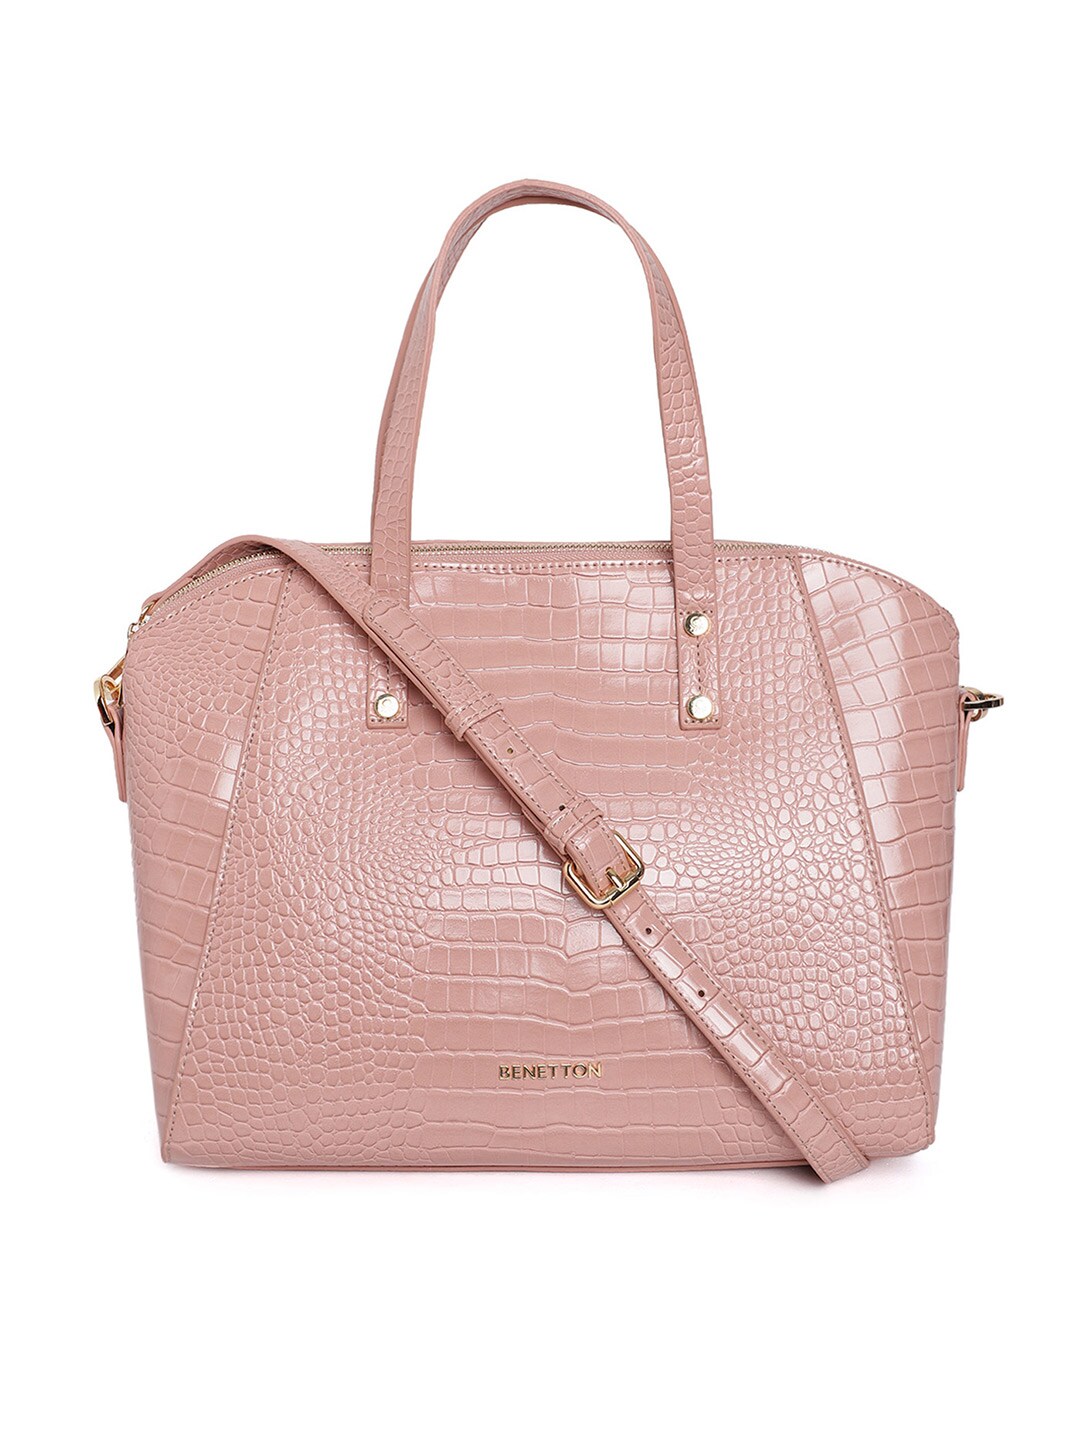 United Colors of Benetton Pink Animal Textured Handheld Bag Price in India